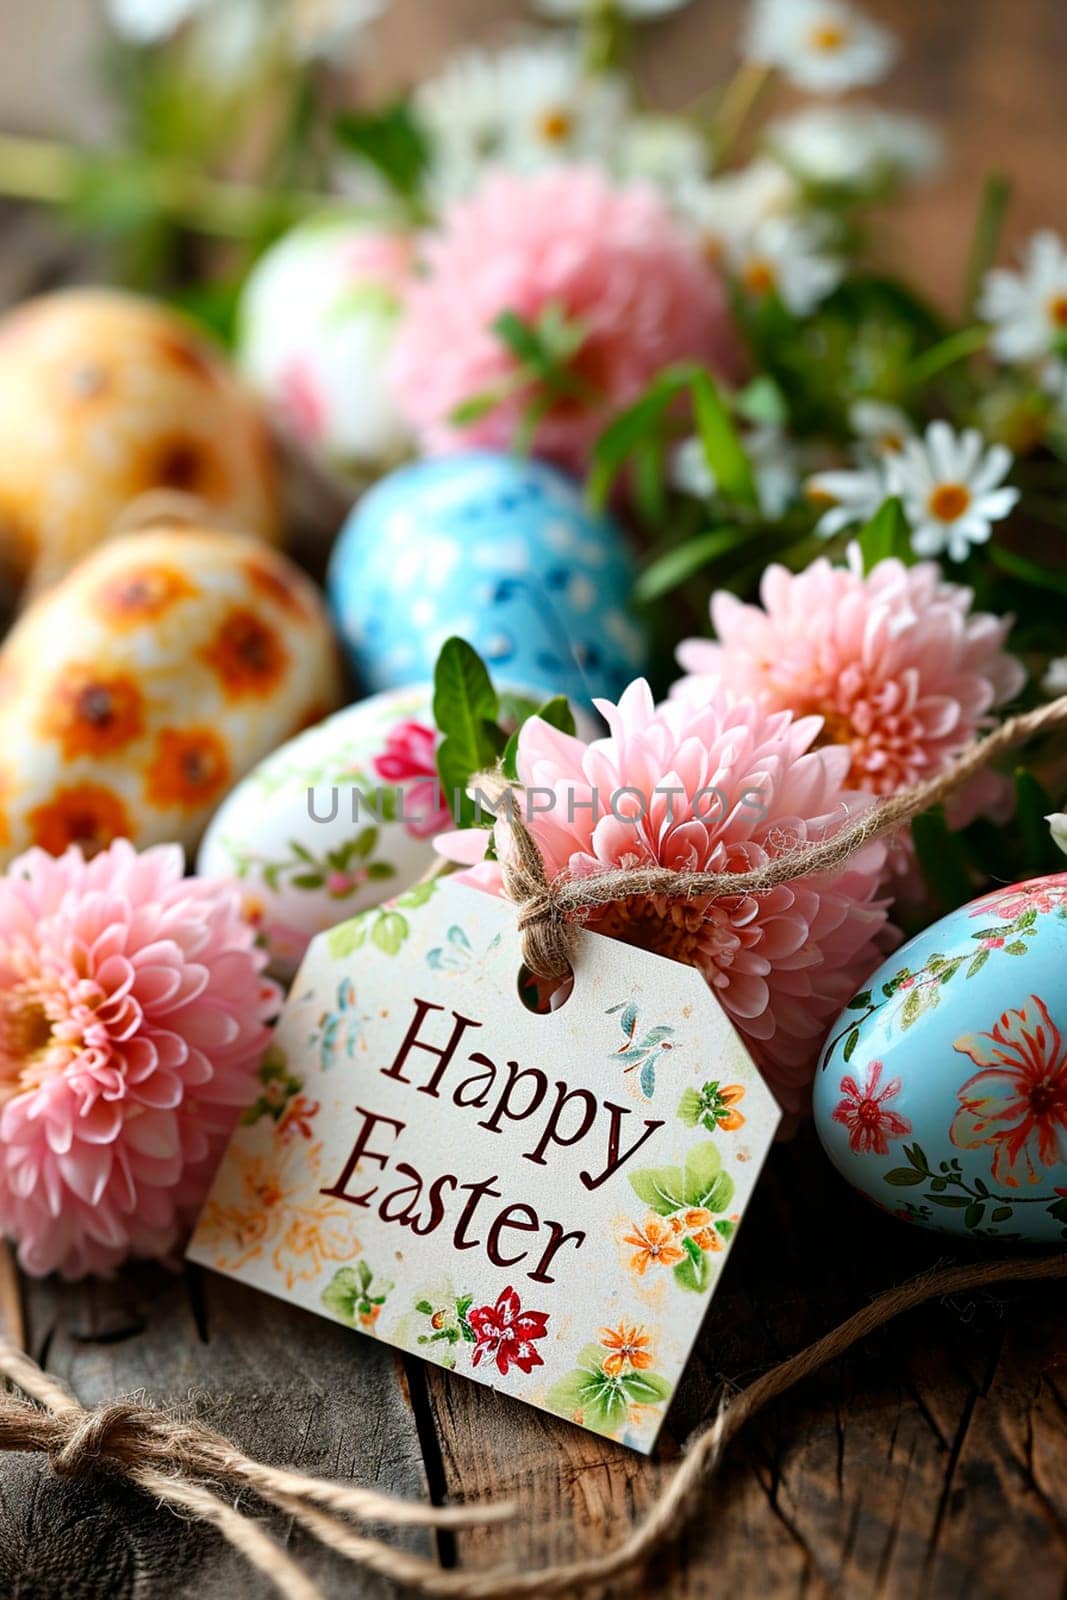 Happy Easter card and eggs. Selective focus. by mila1784